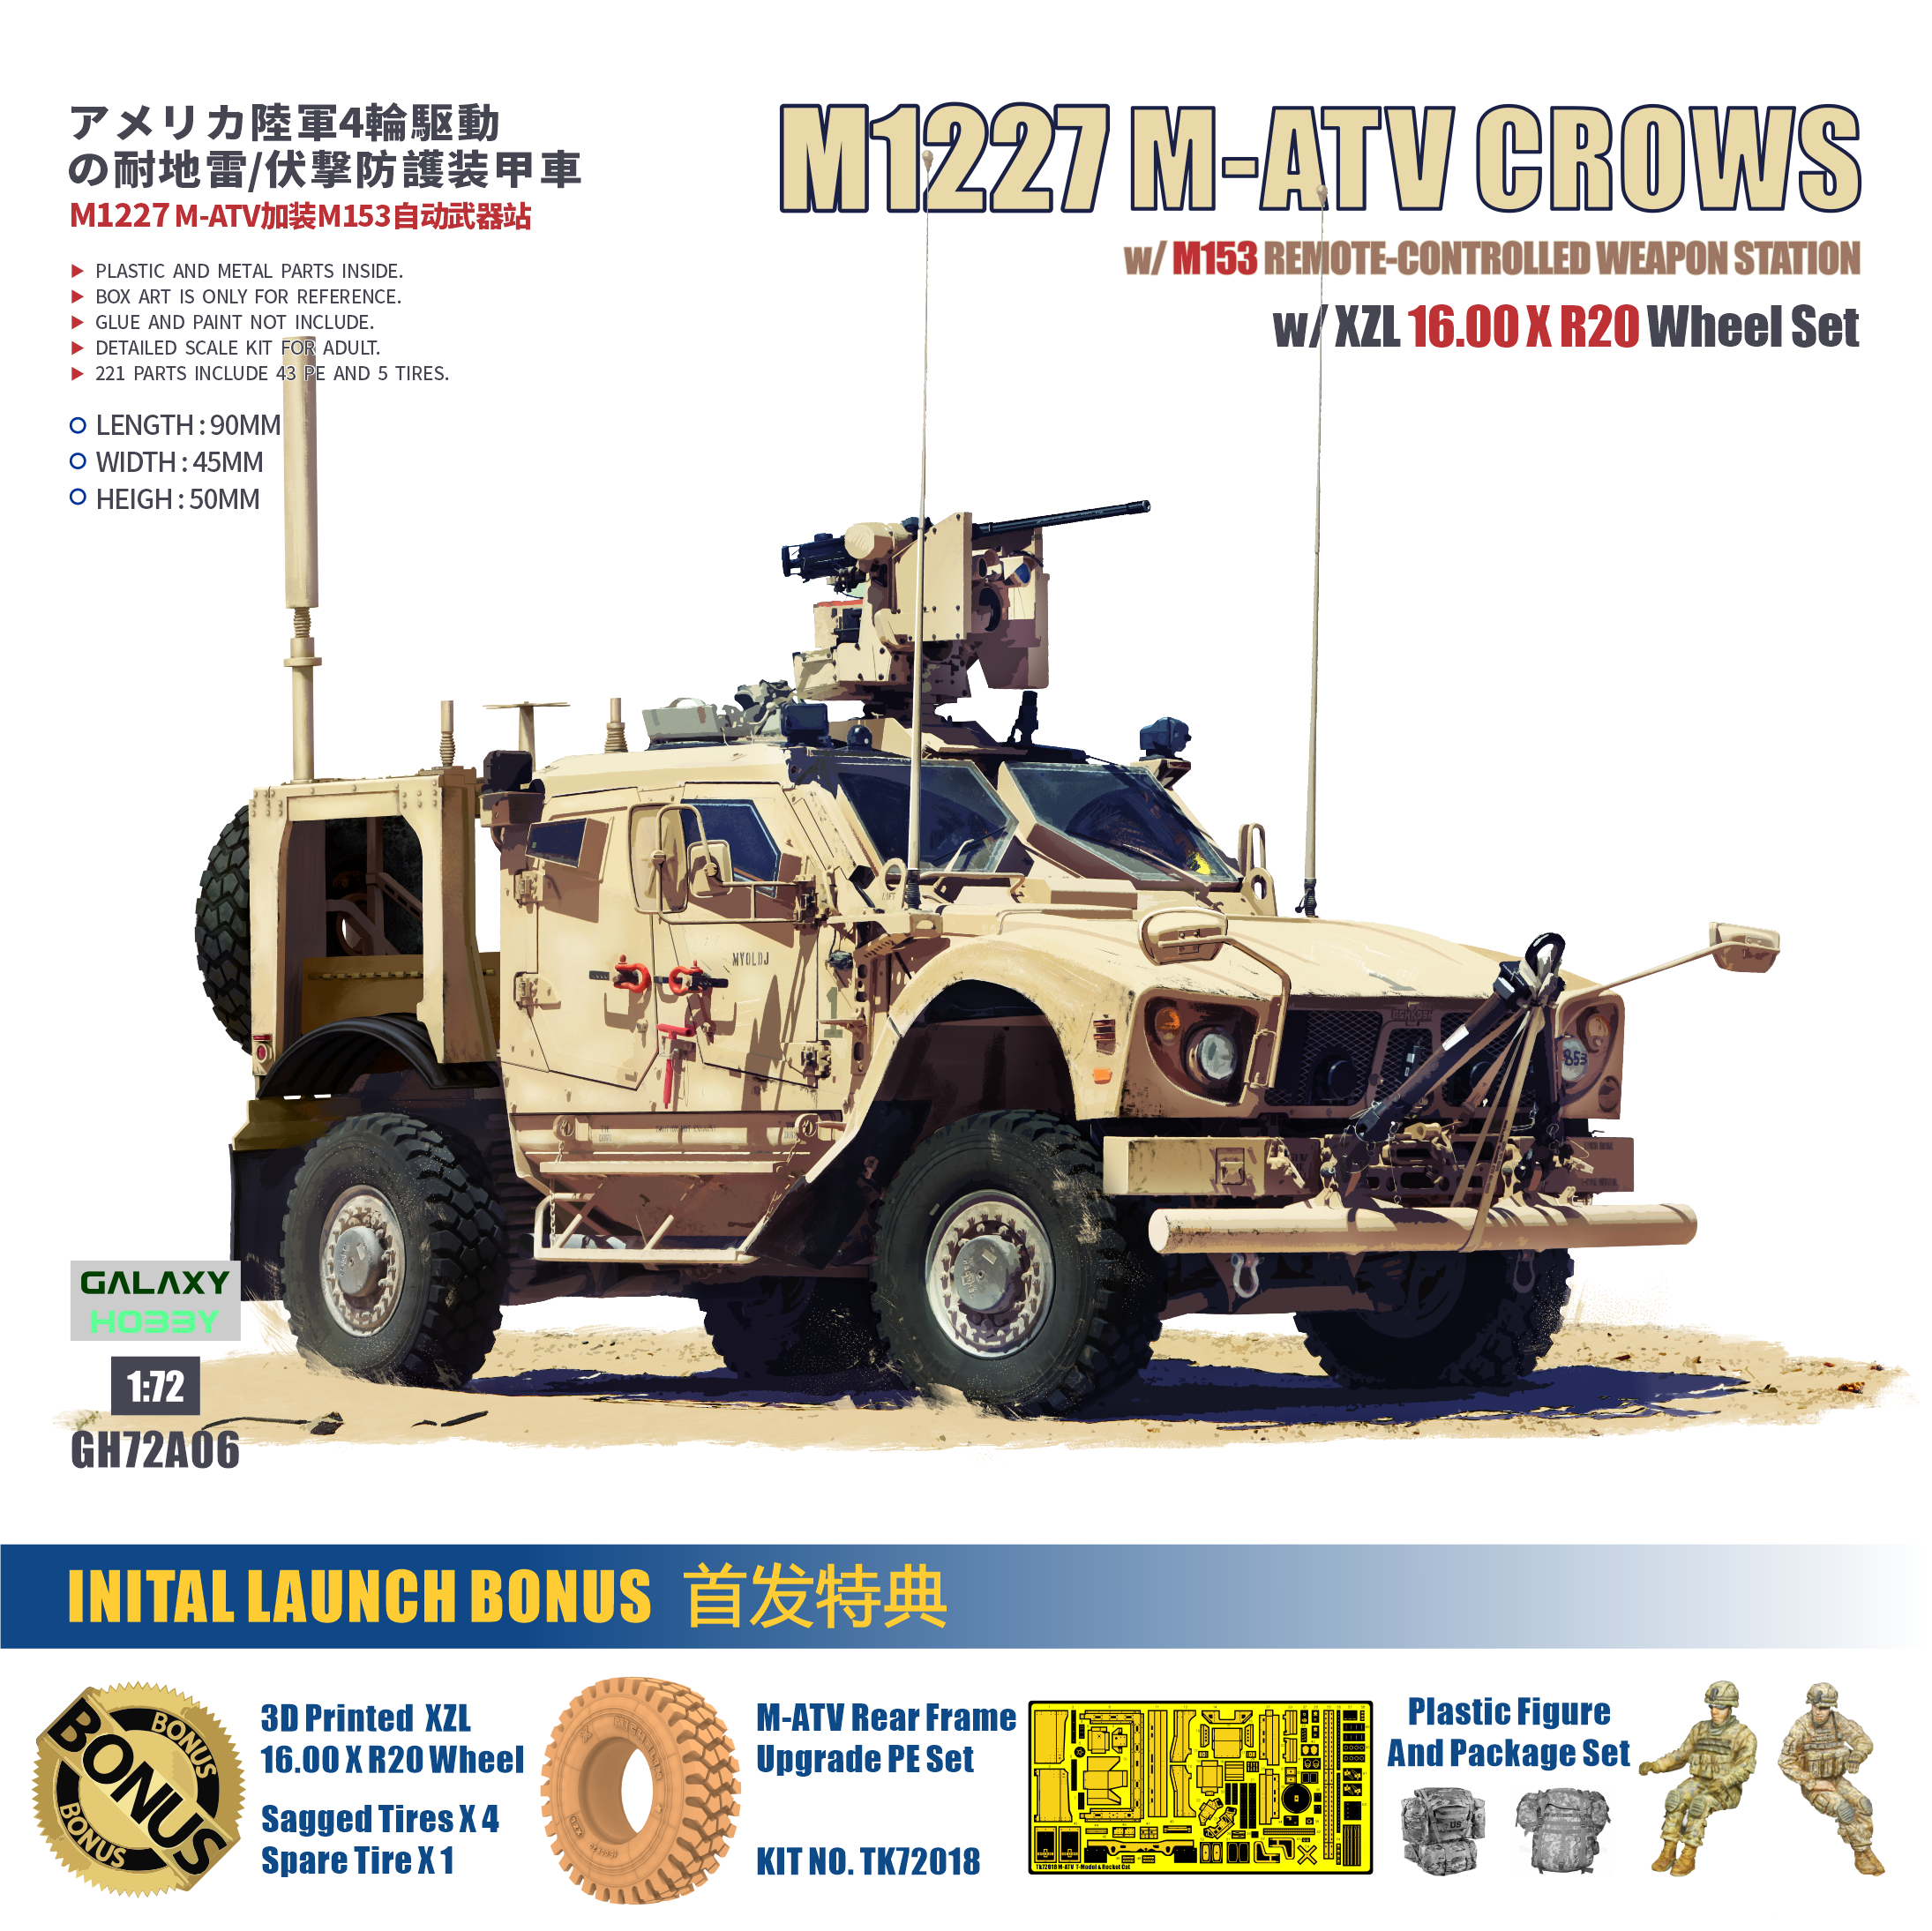 M1277A1 M-ATV with M153 CROWS